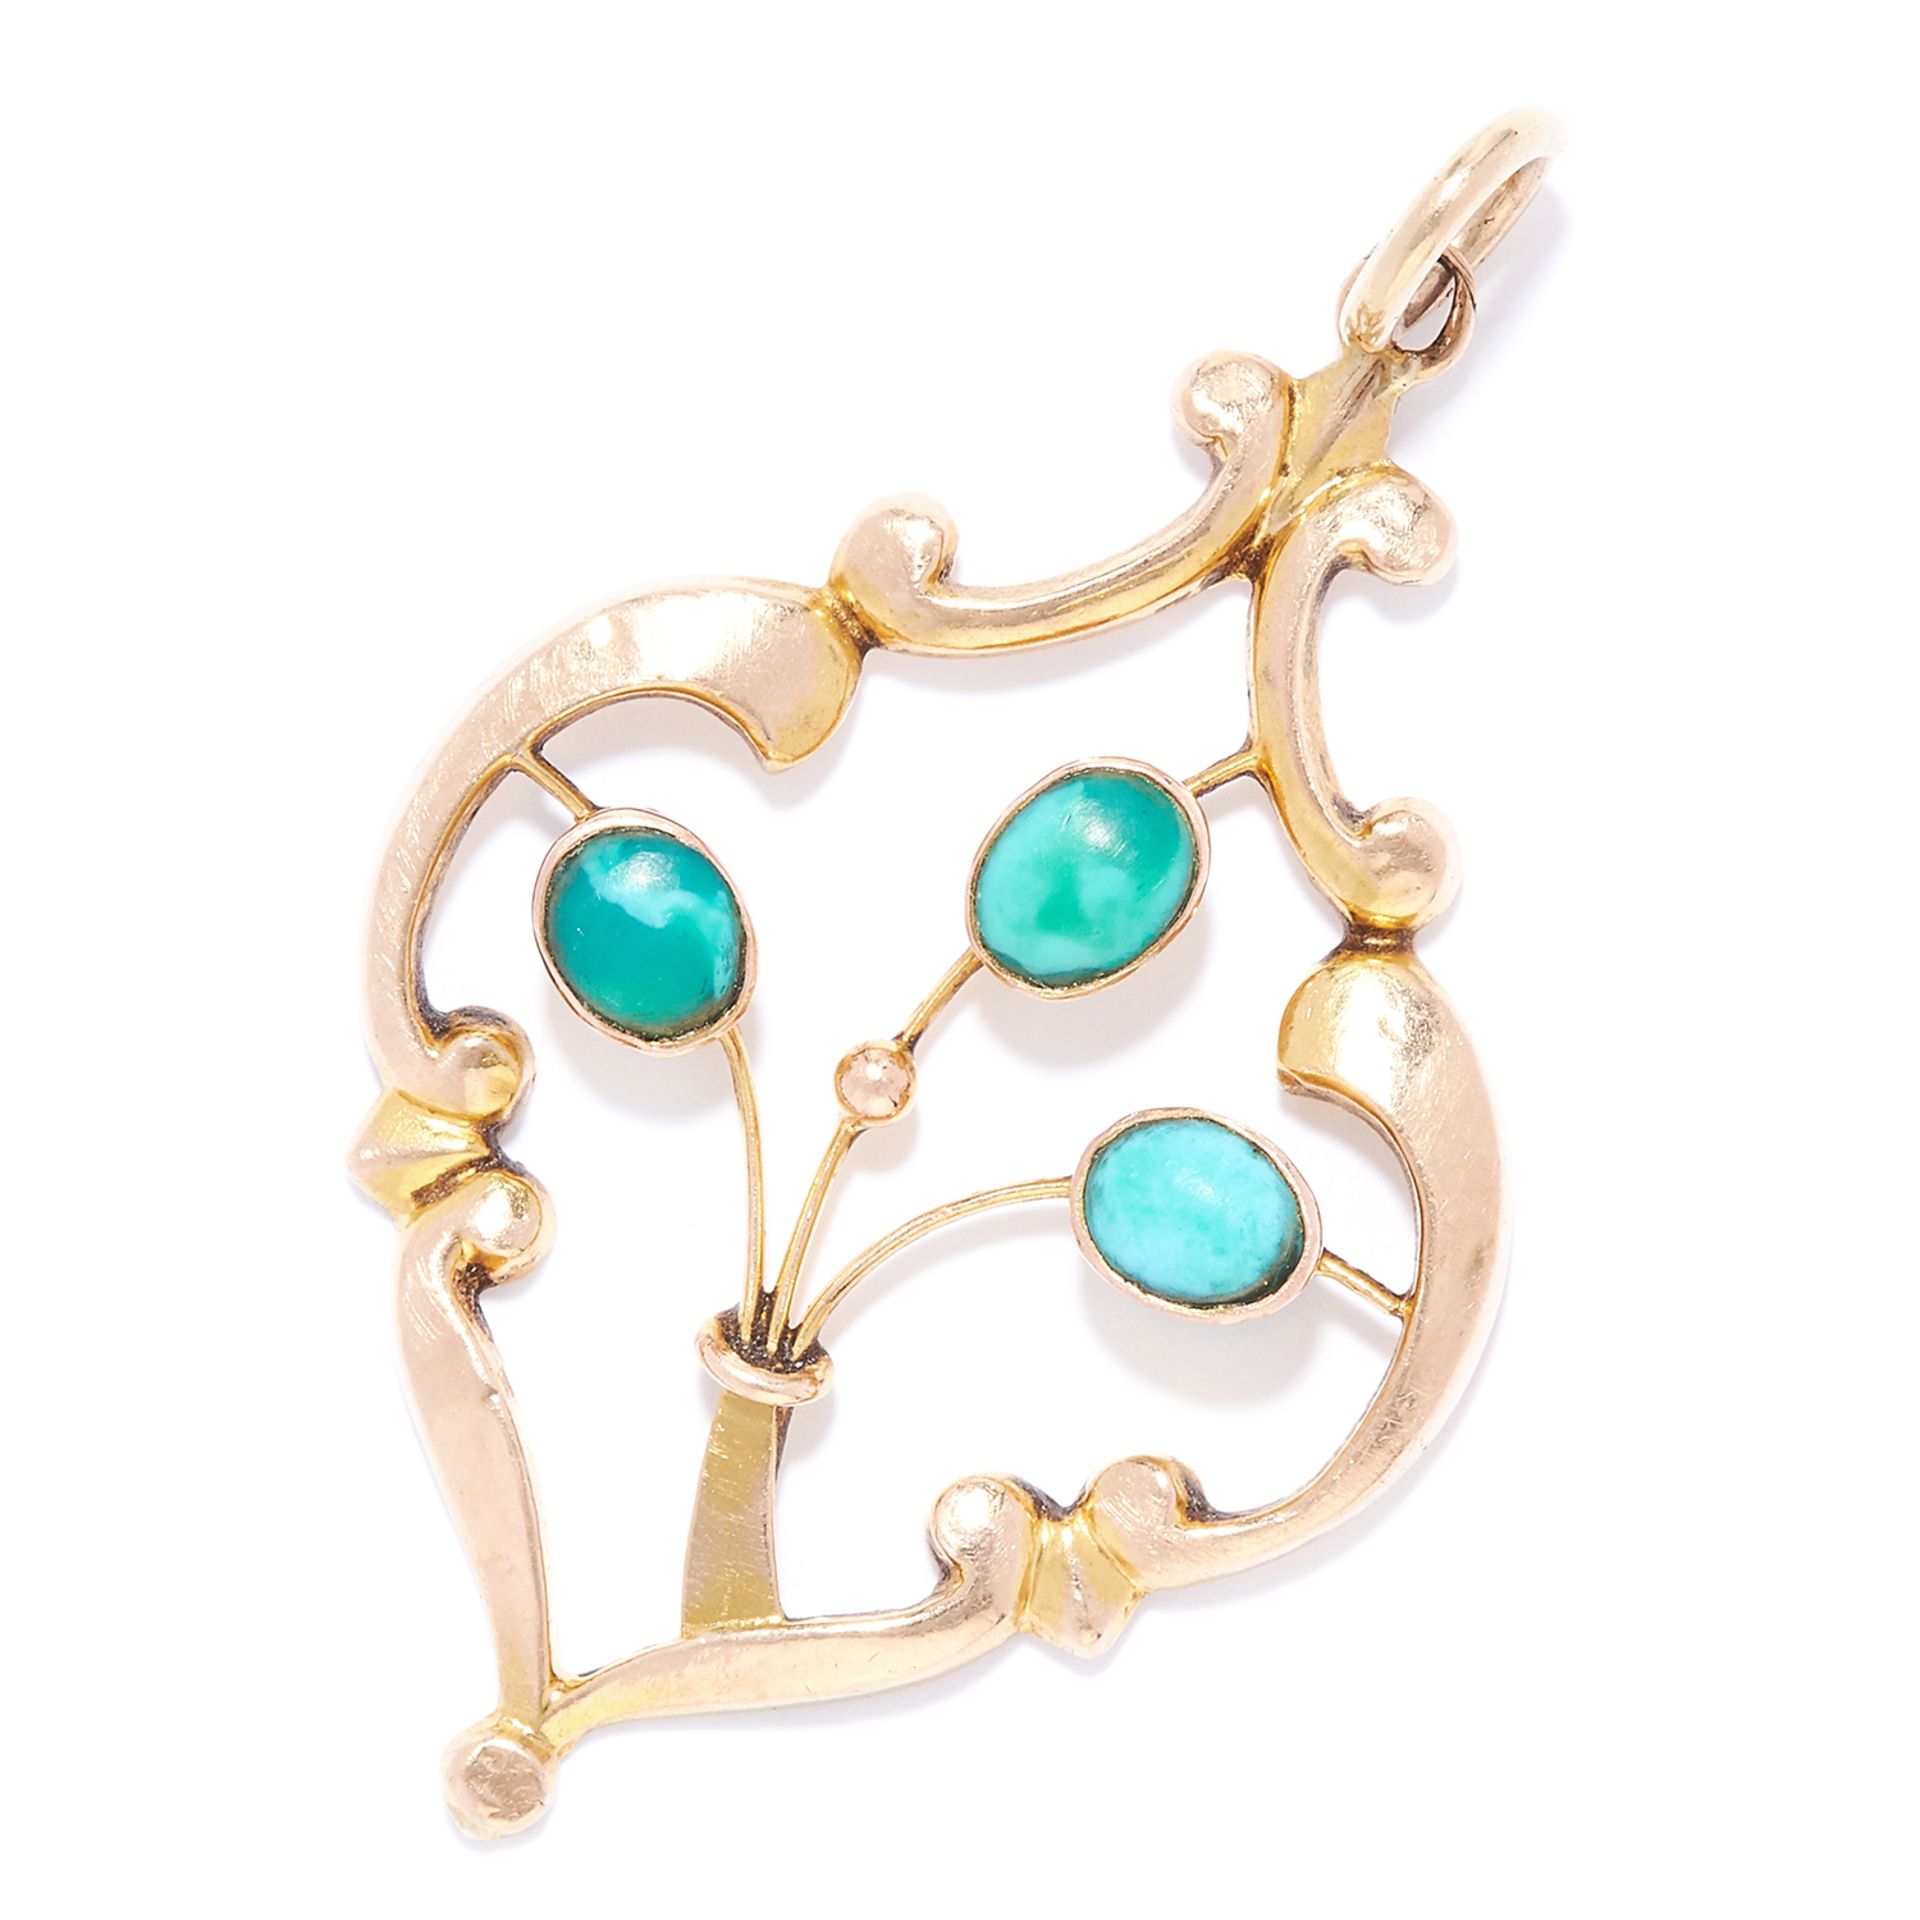 ANTIQUE TURQUOISE PENDANT in yellow gold, the scrolling design jewelled with turquoise cabochons,